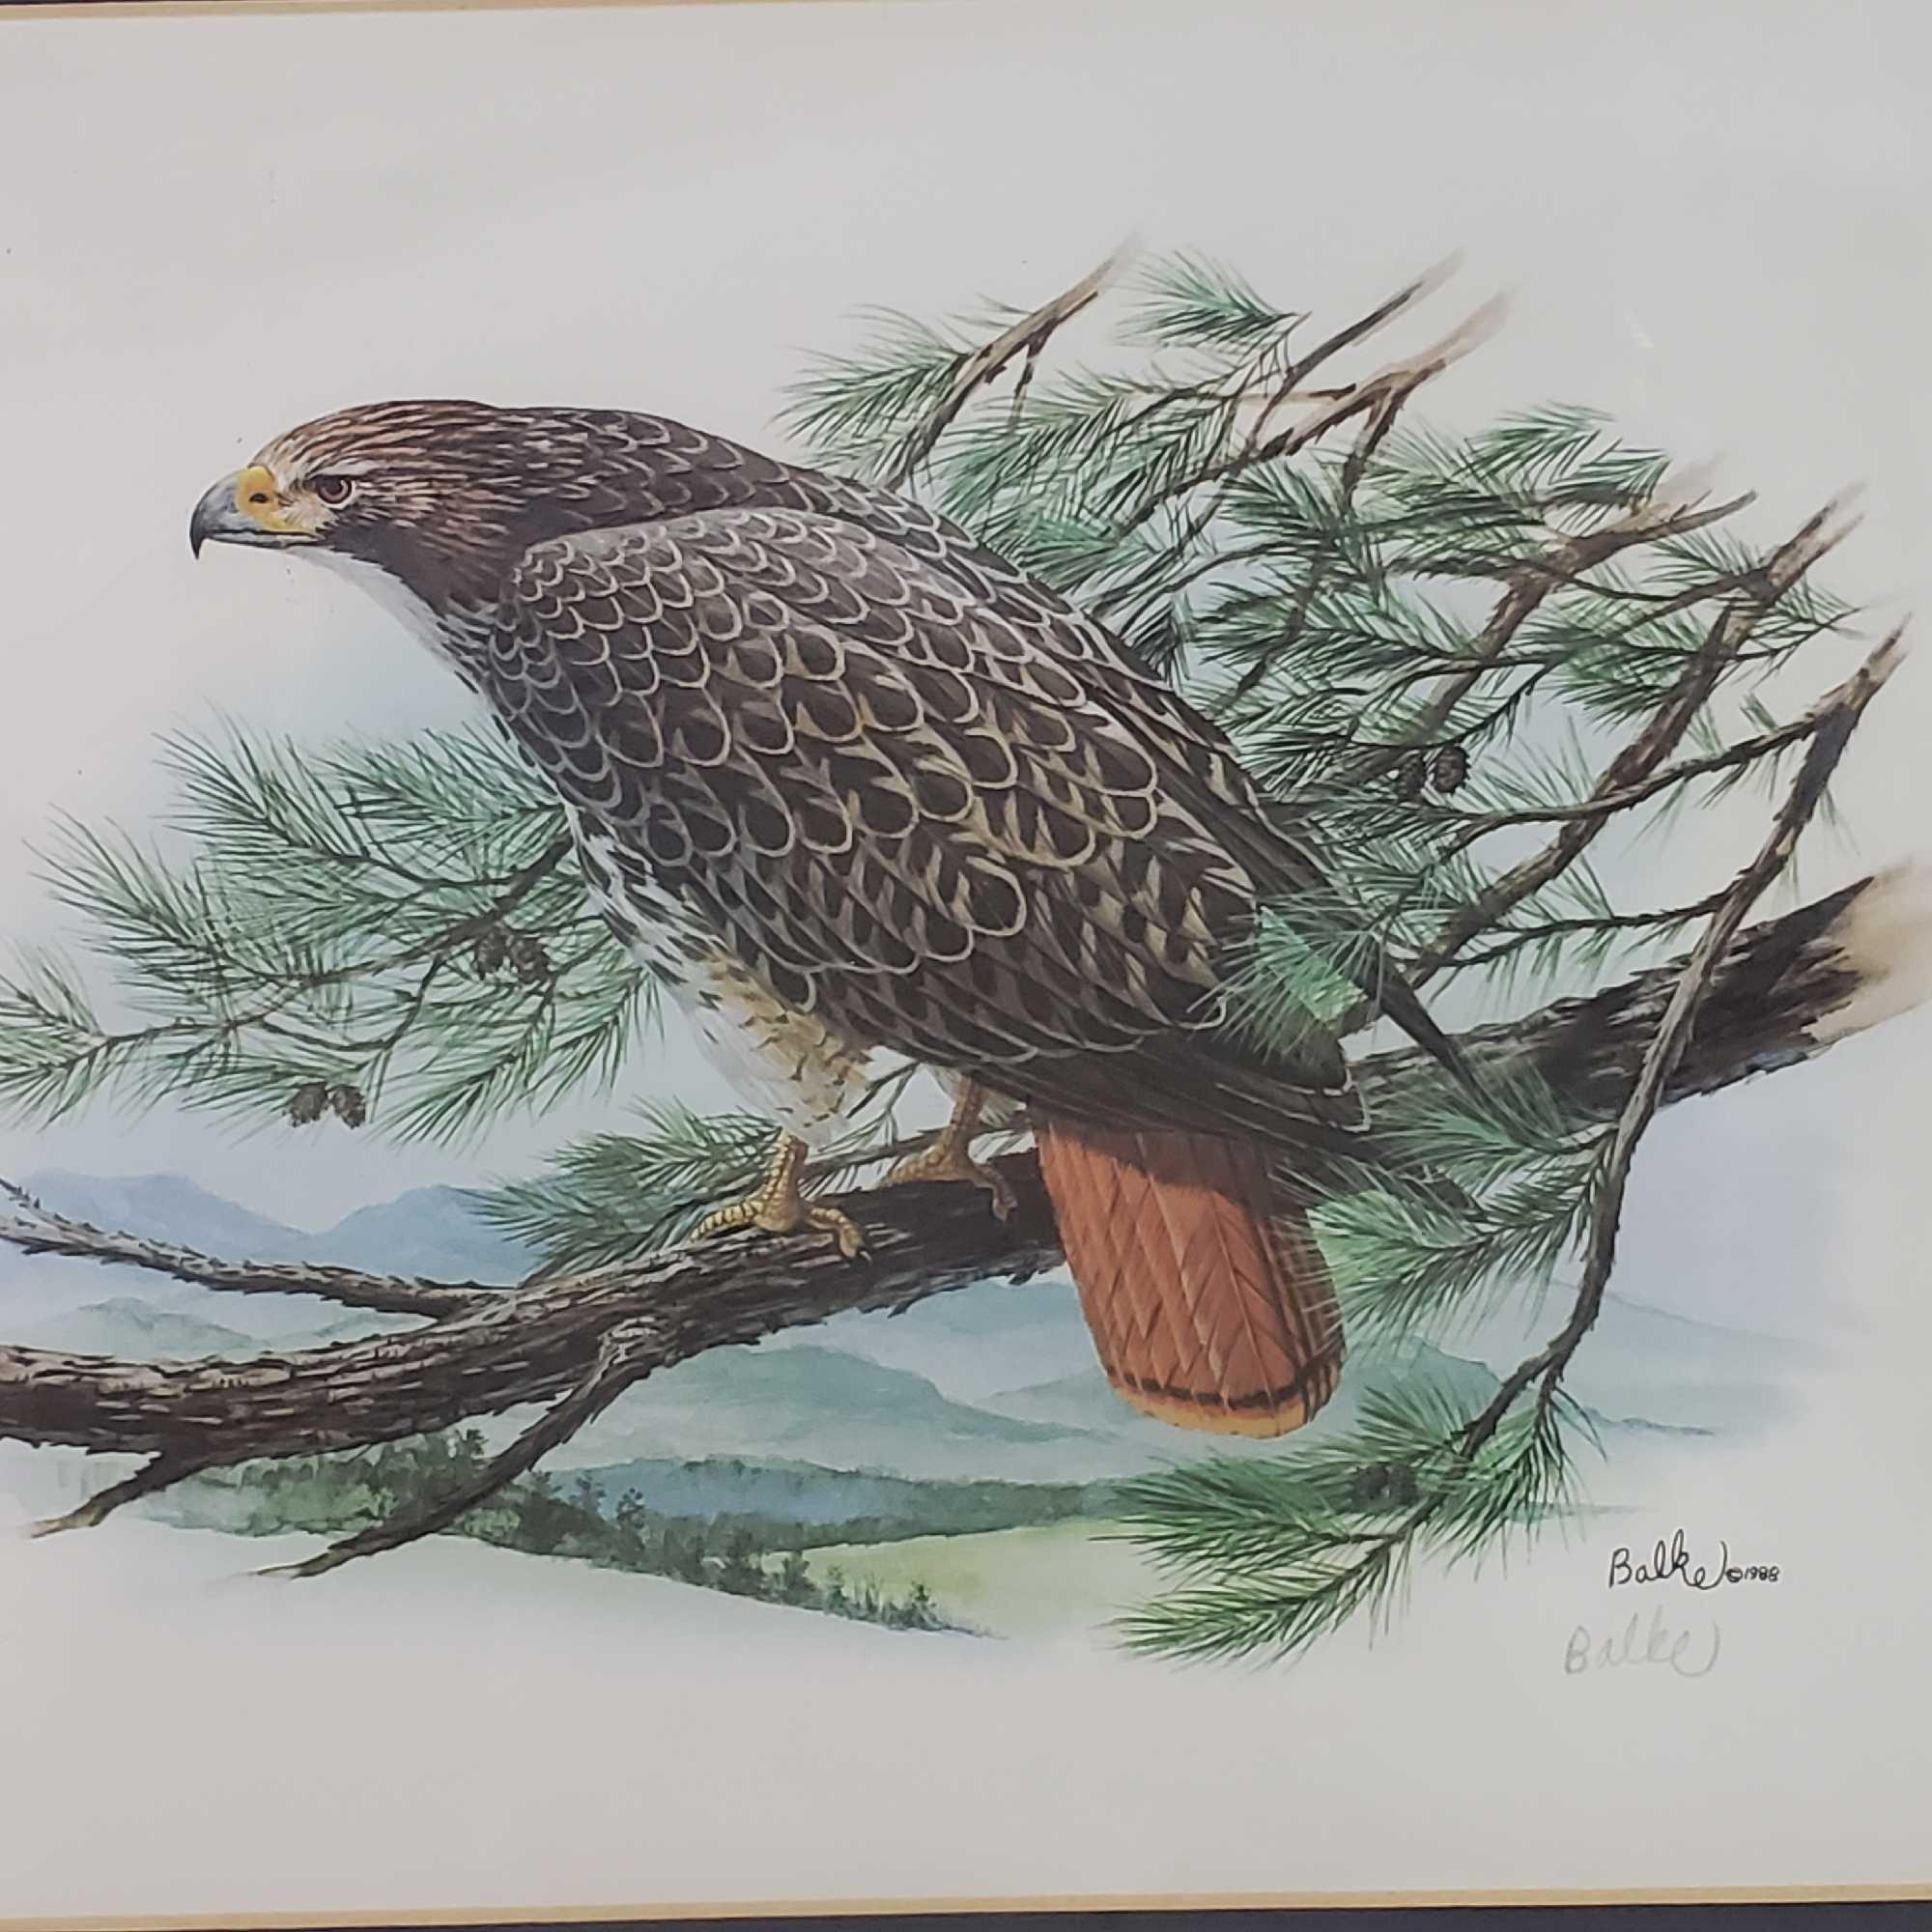 FRAMED RED TAILED HAWK LITHOGRAPH PRINT SIGNED BALKE DATED 1988